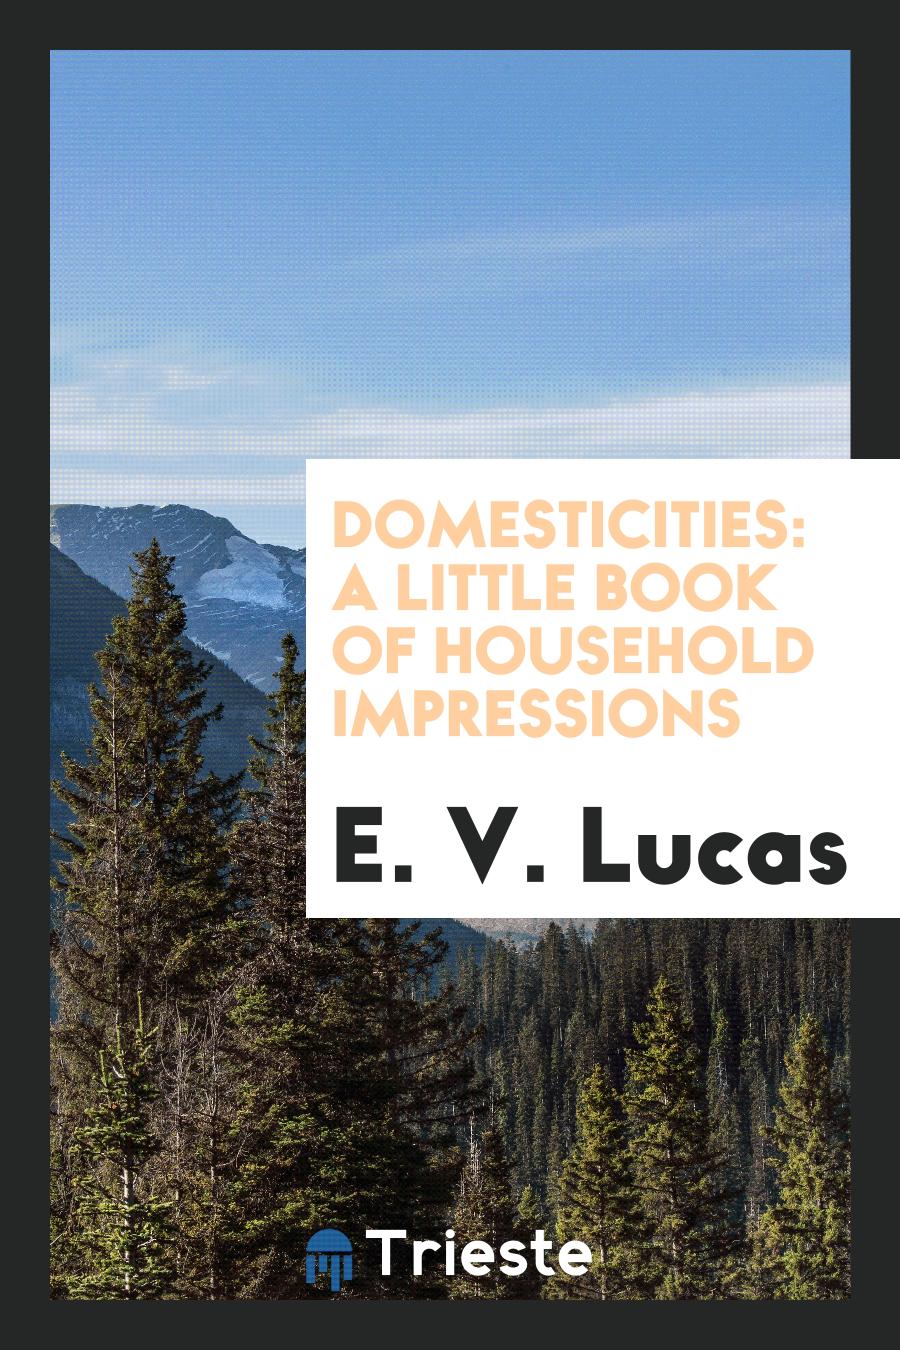 Domesticities: a little book of household impressions